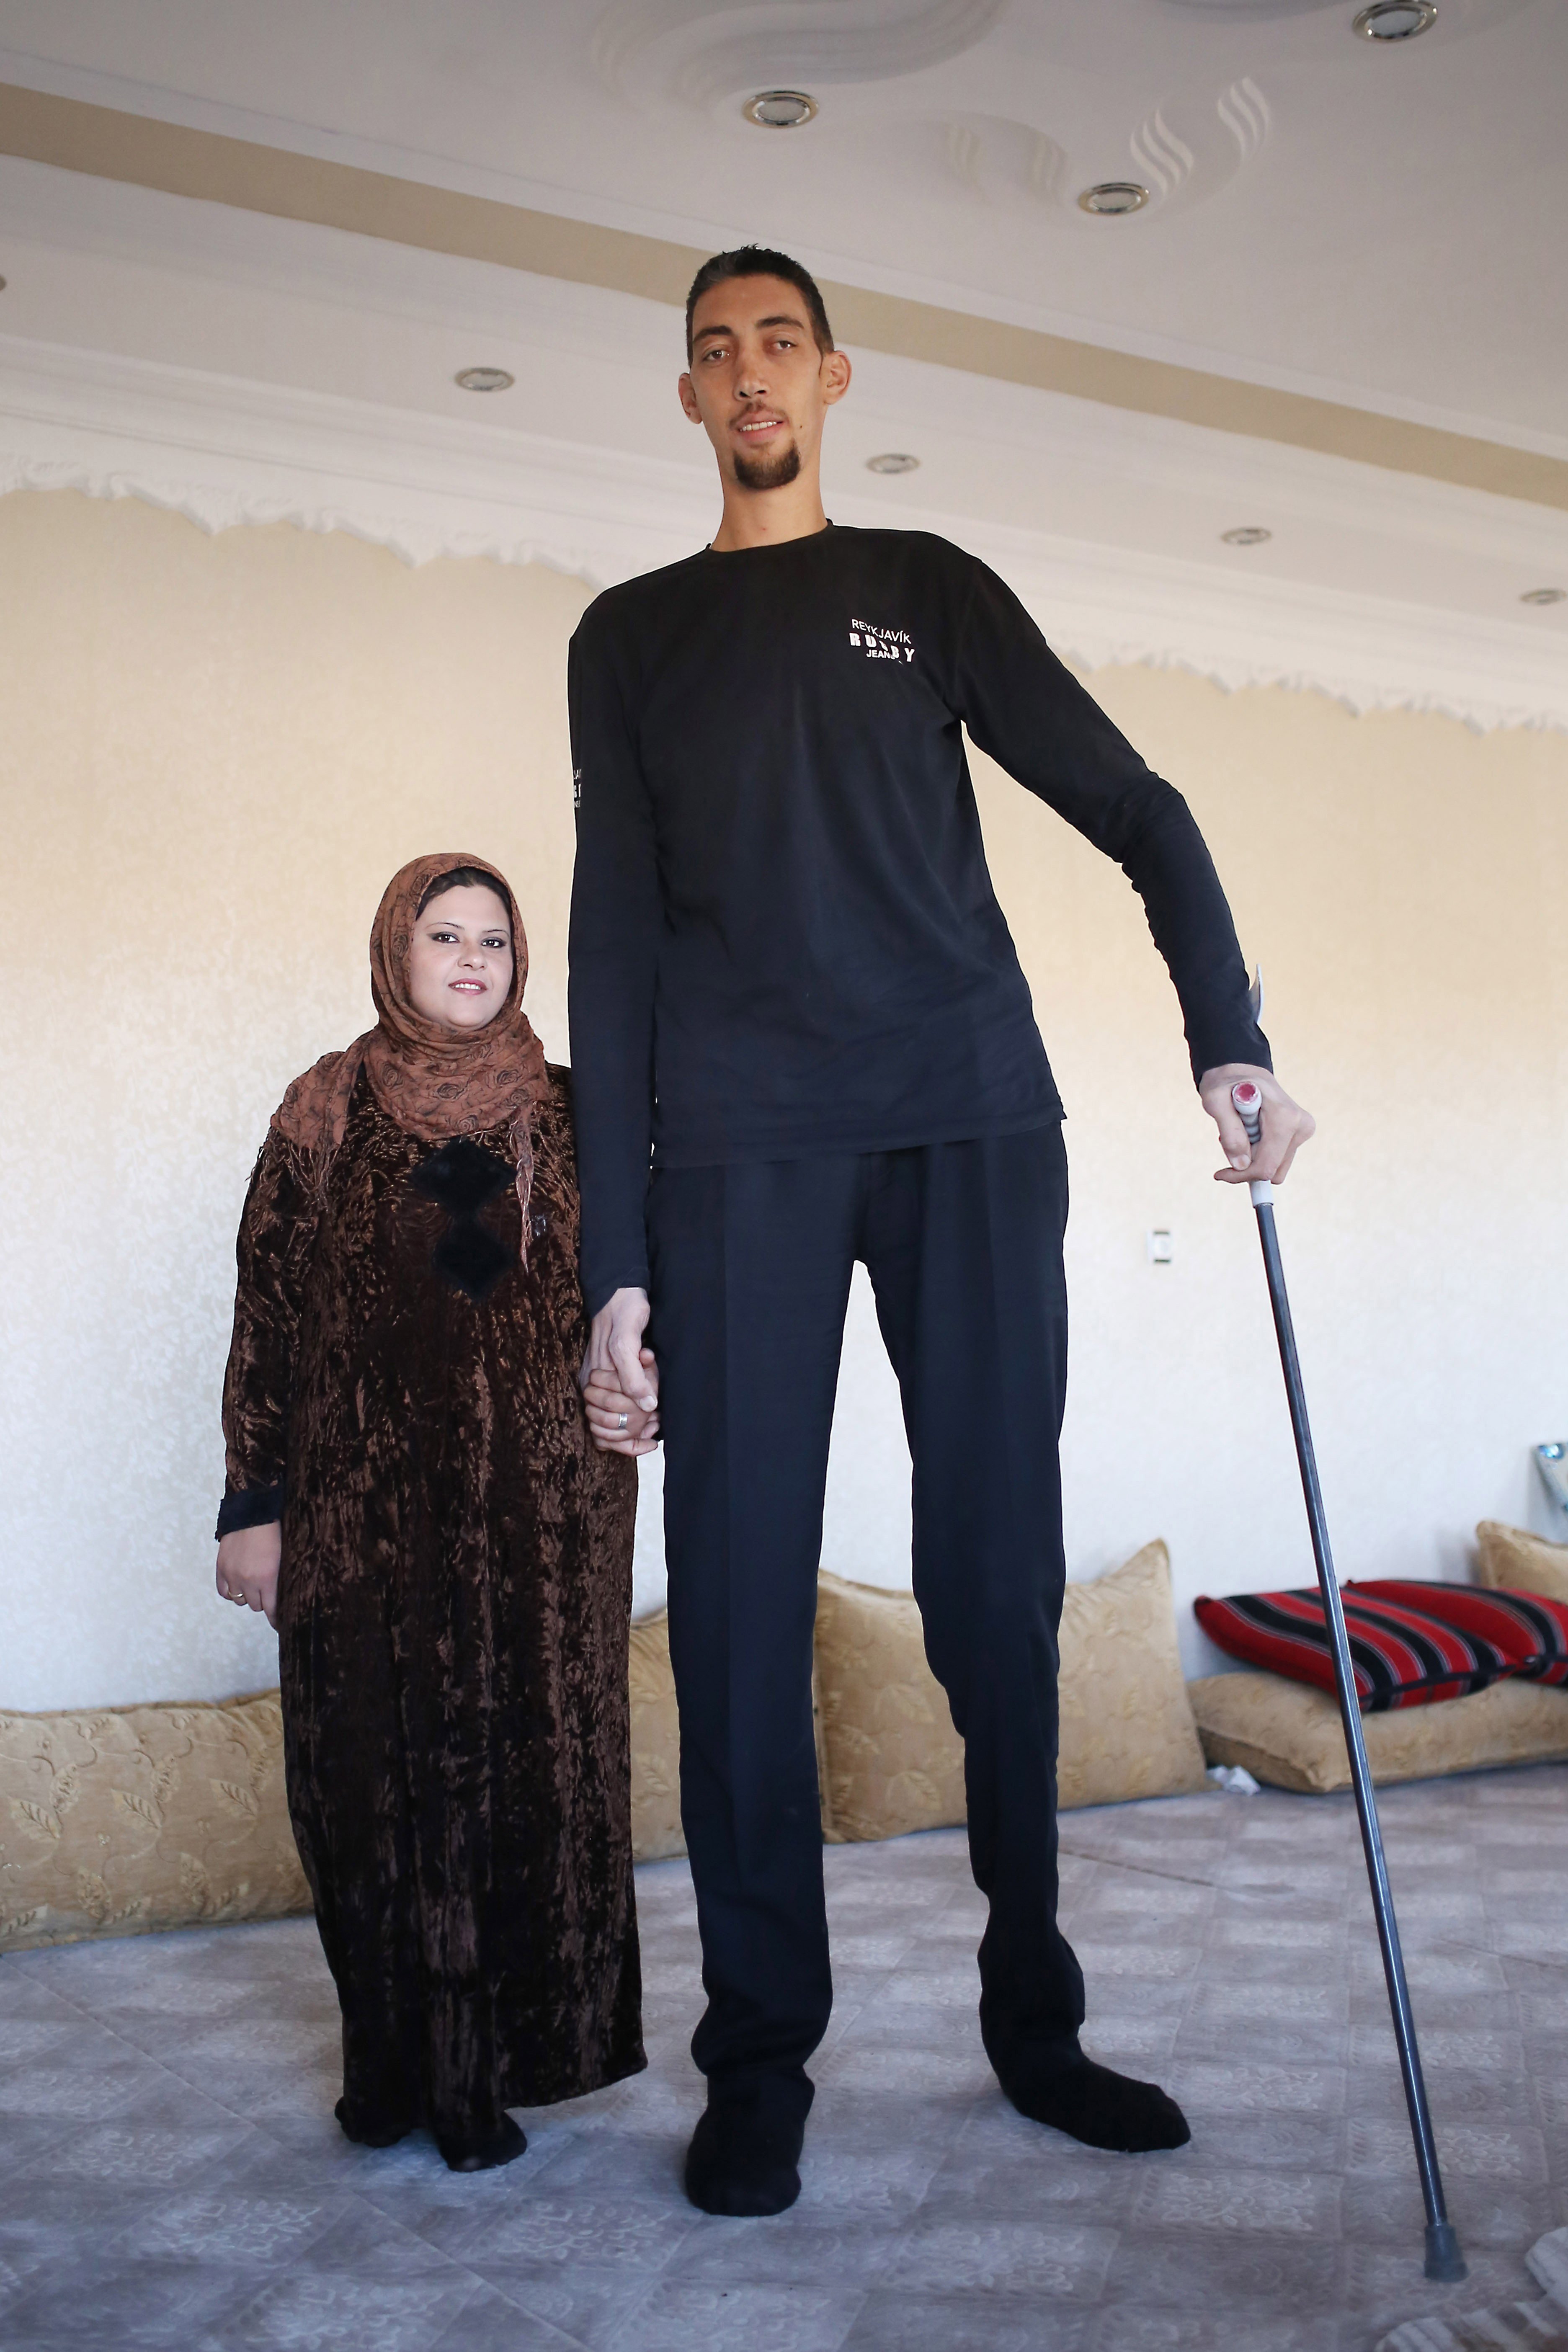 Sultan Kosen (R), world's tallest living male at 2.51 meters, poses with his wife, Merve Dibo (L), on their wedding anniversary in Mardin, Turkey, on November 9, 2014. | Source: Getty Images